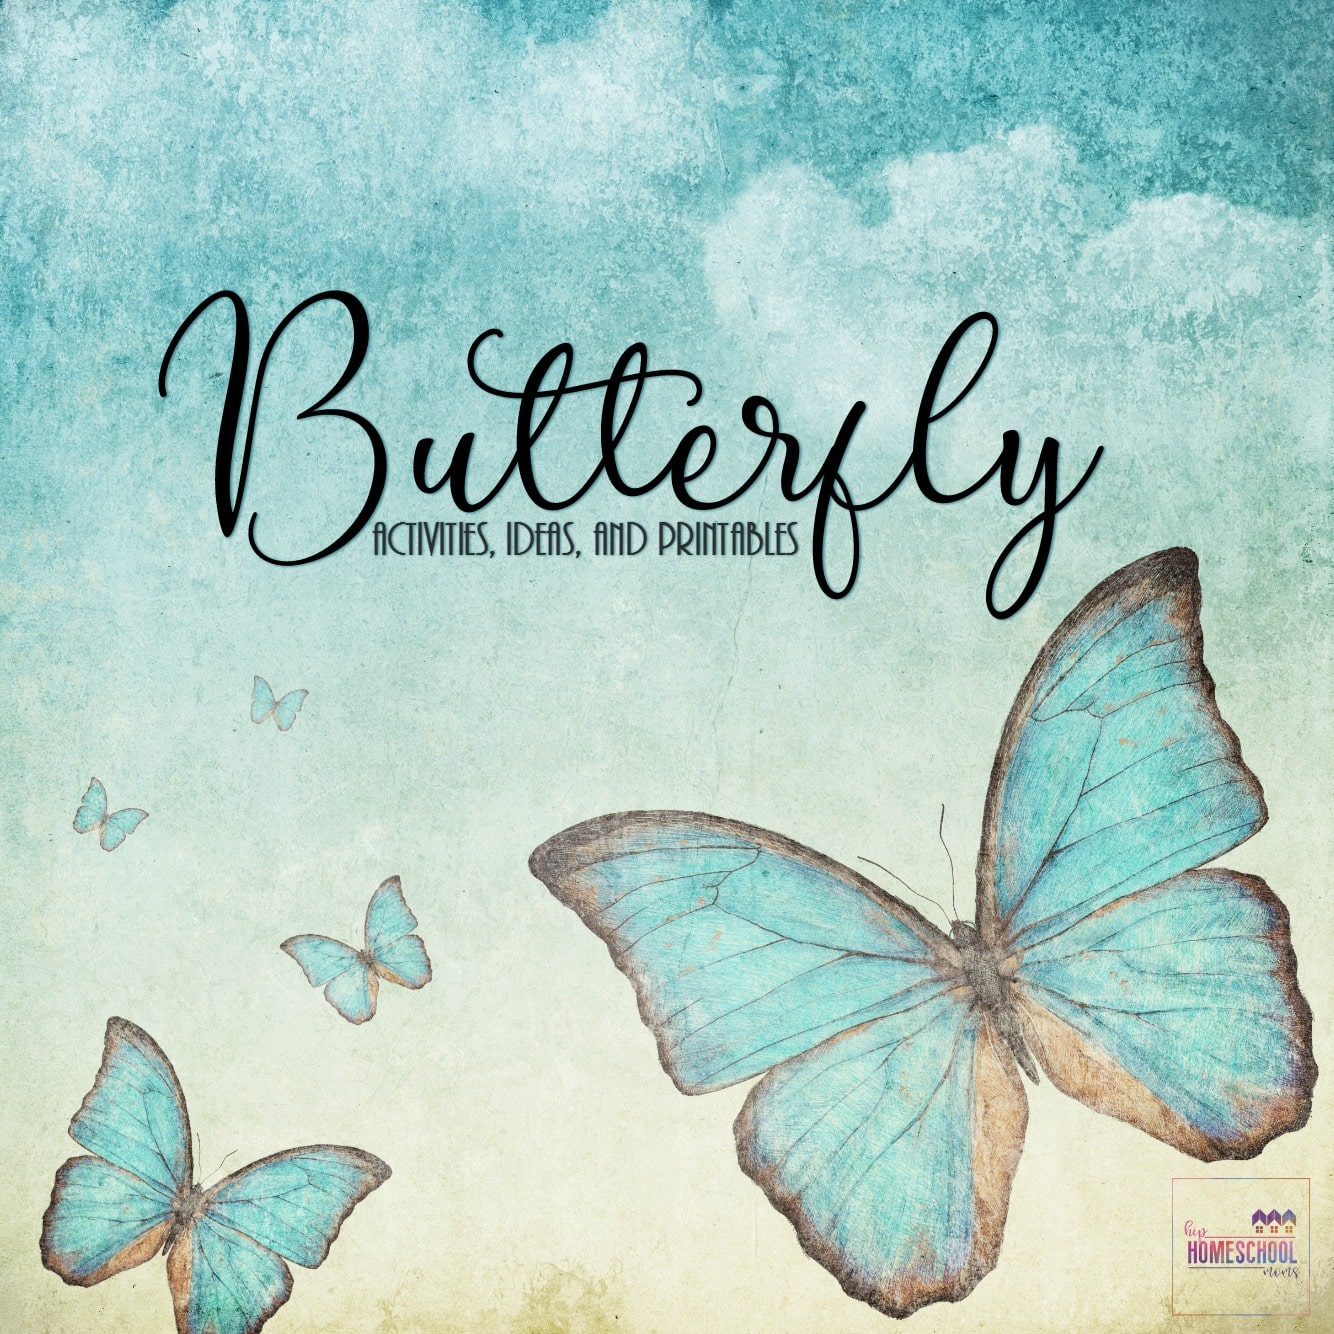 Butterfly Activities, Ideas, and Printables